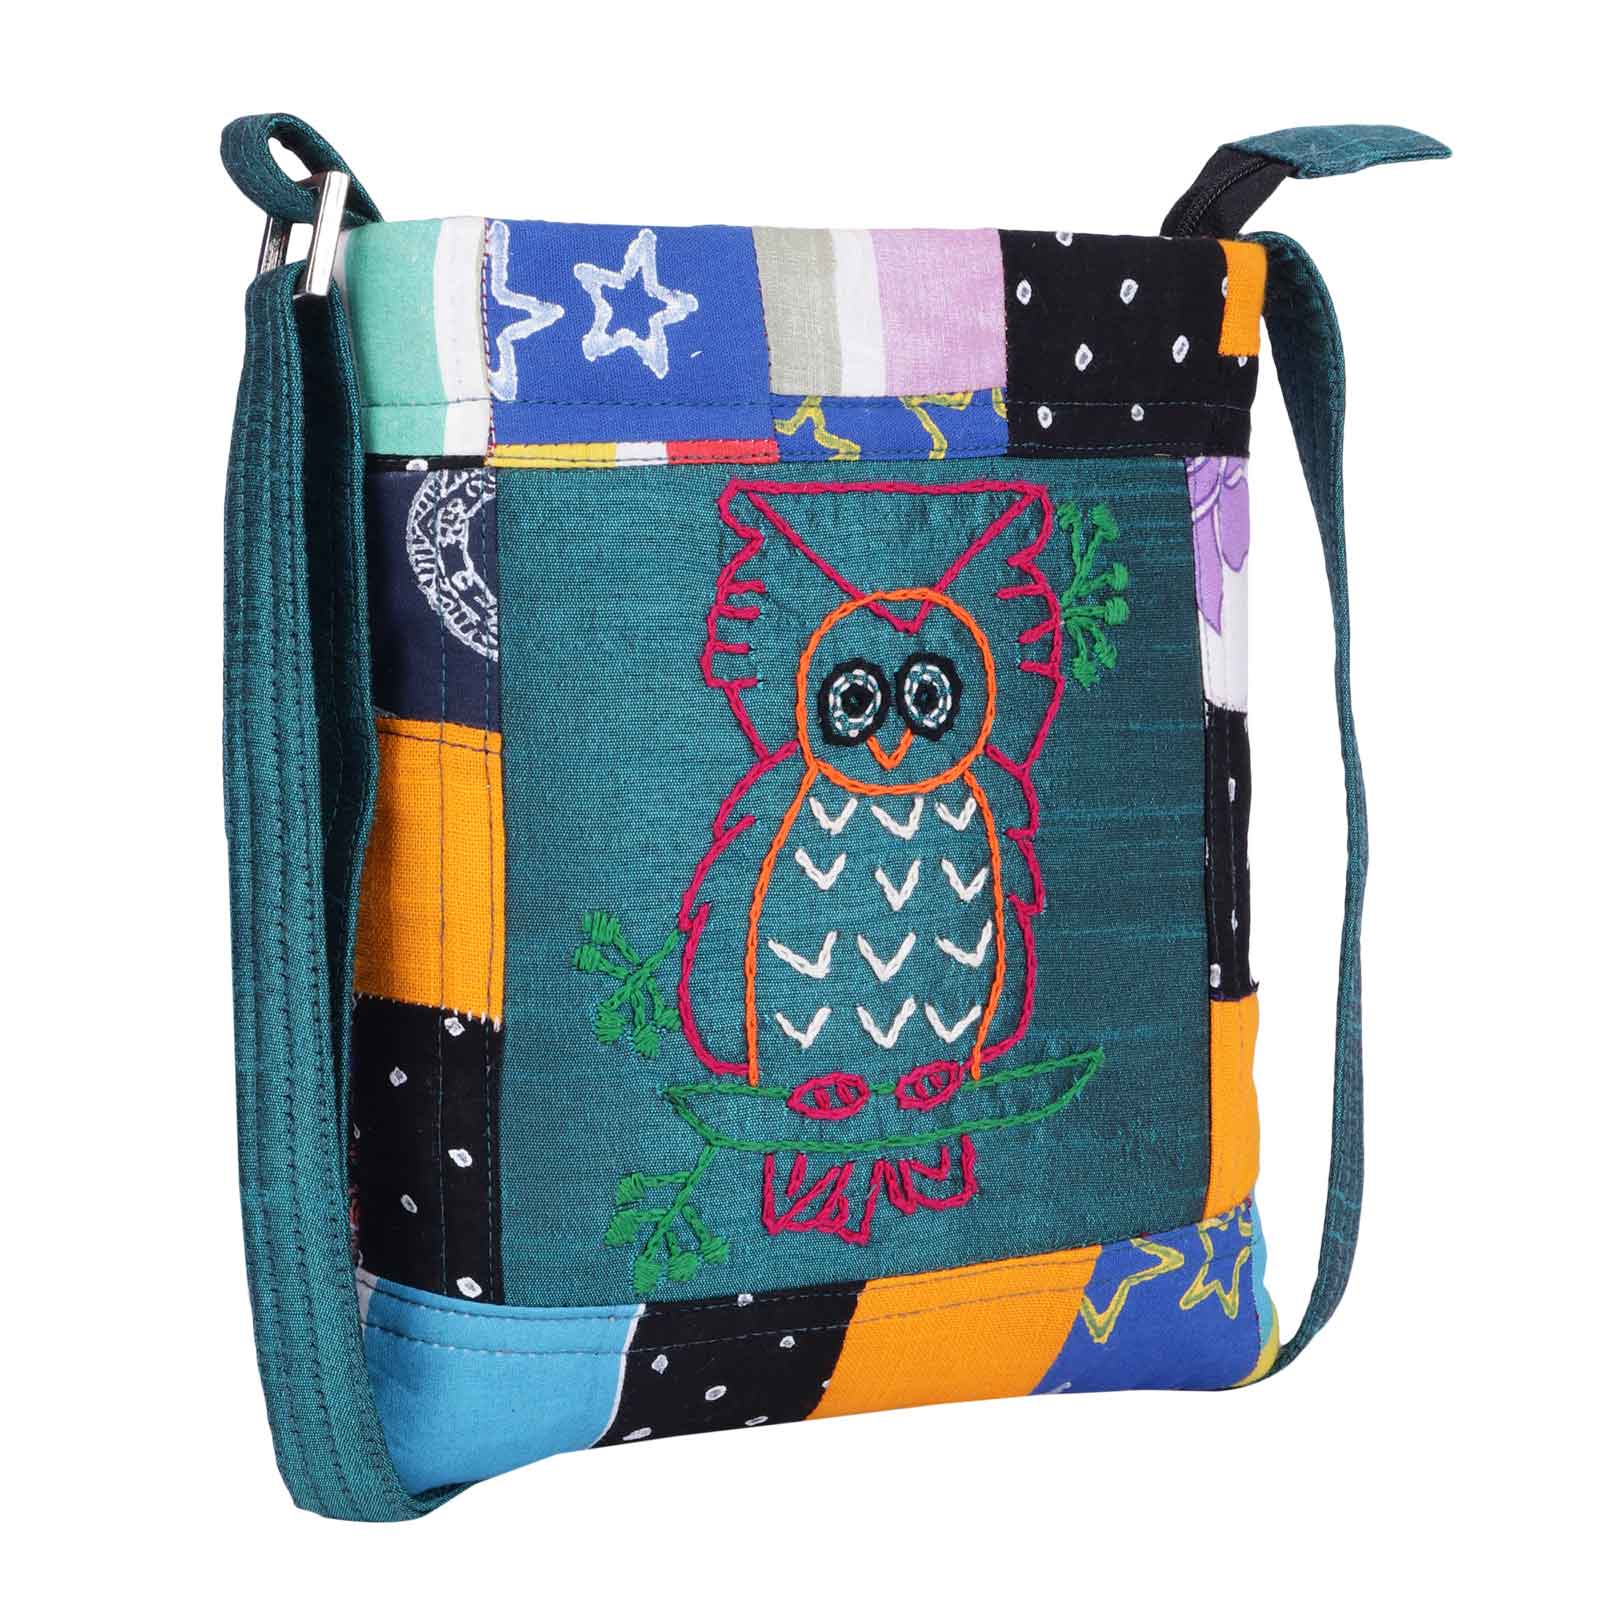 M. Andonia Girls Fabric and Vinyl Coin Purse with Owl Print NEW